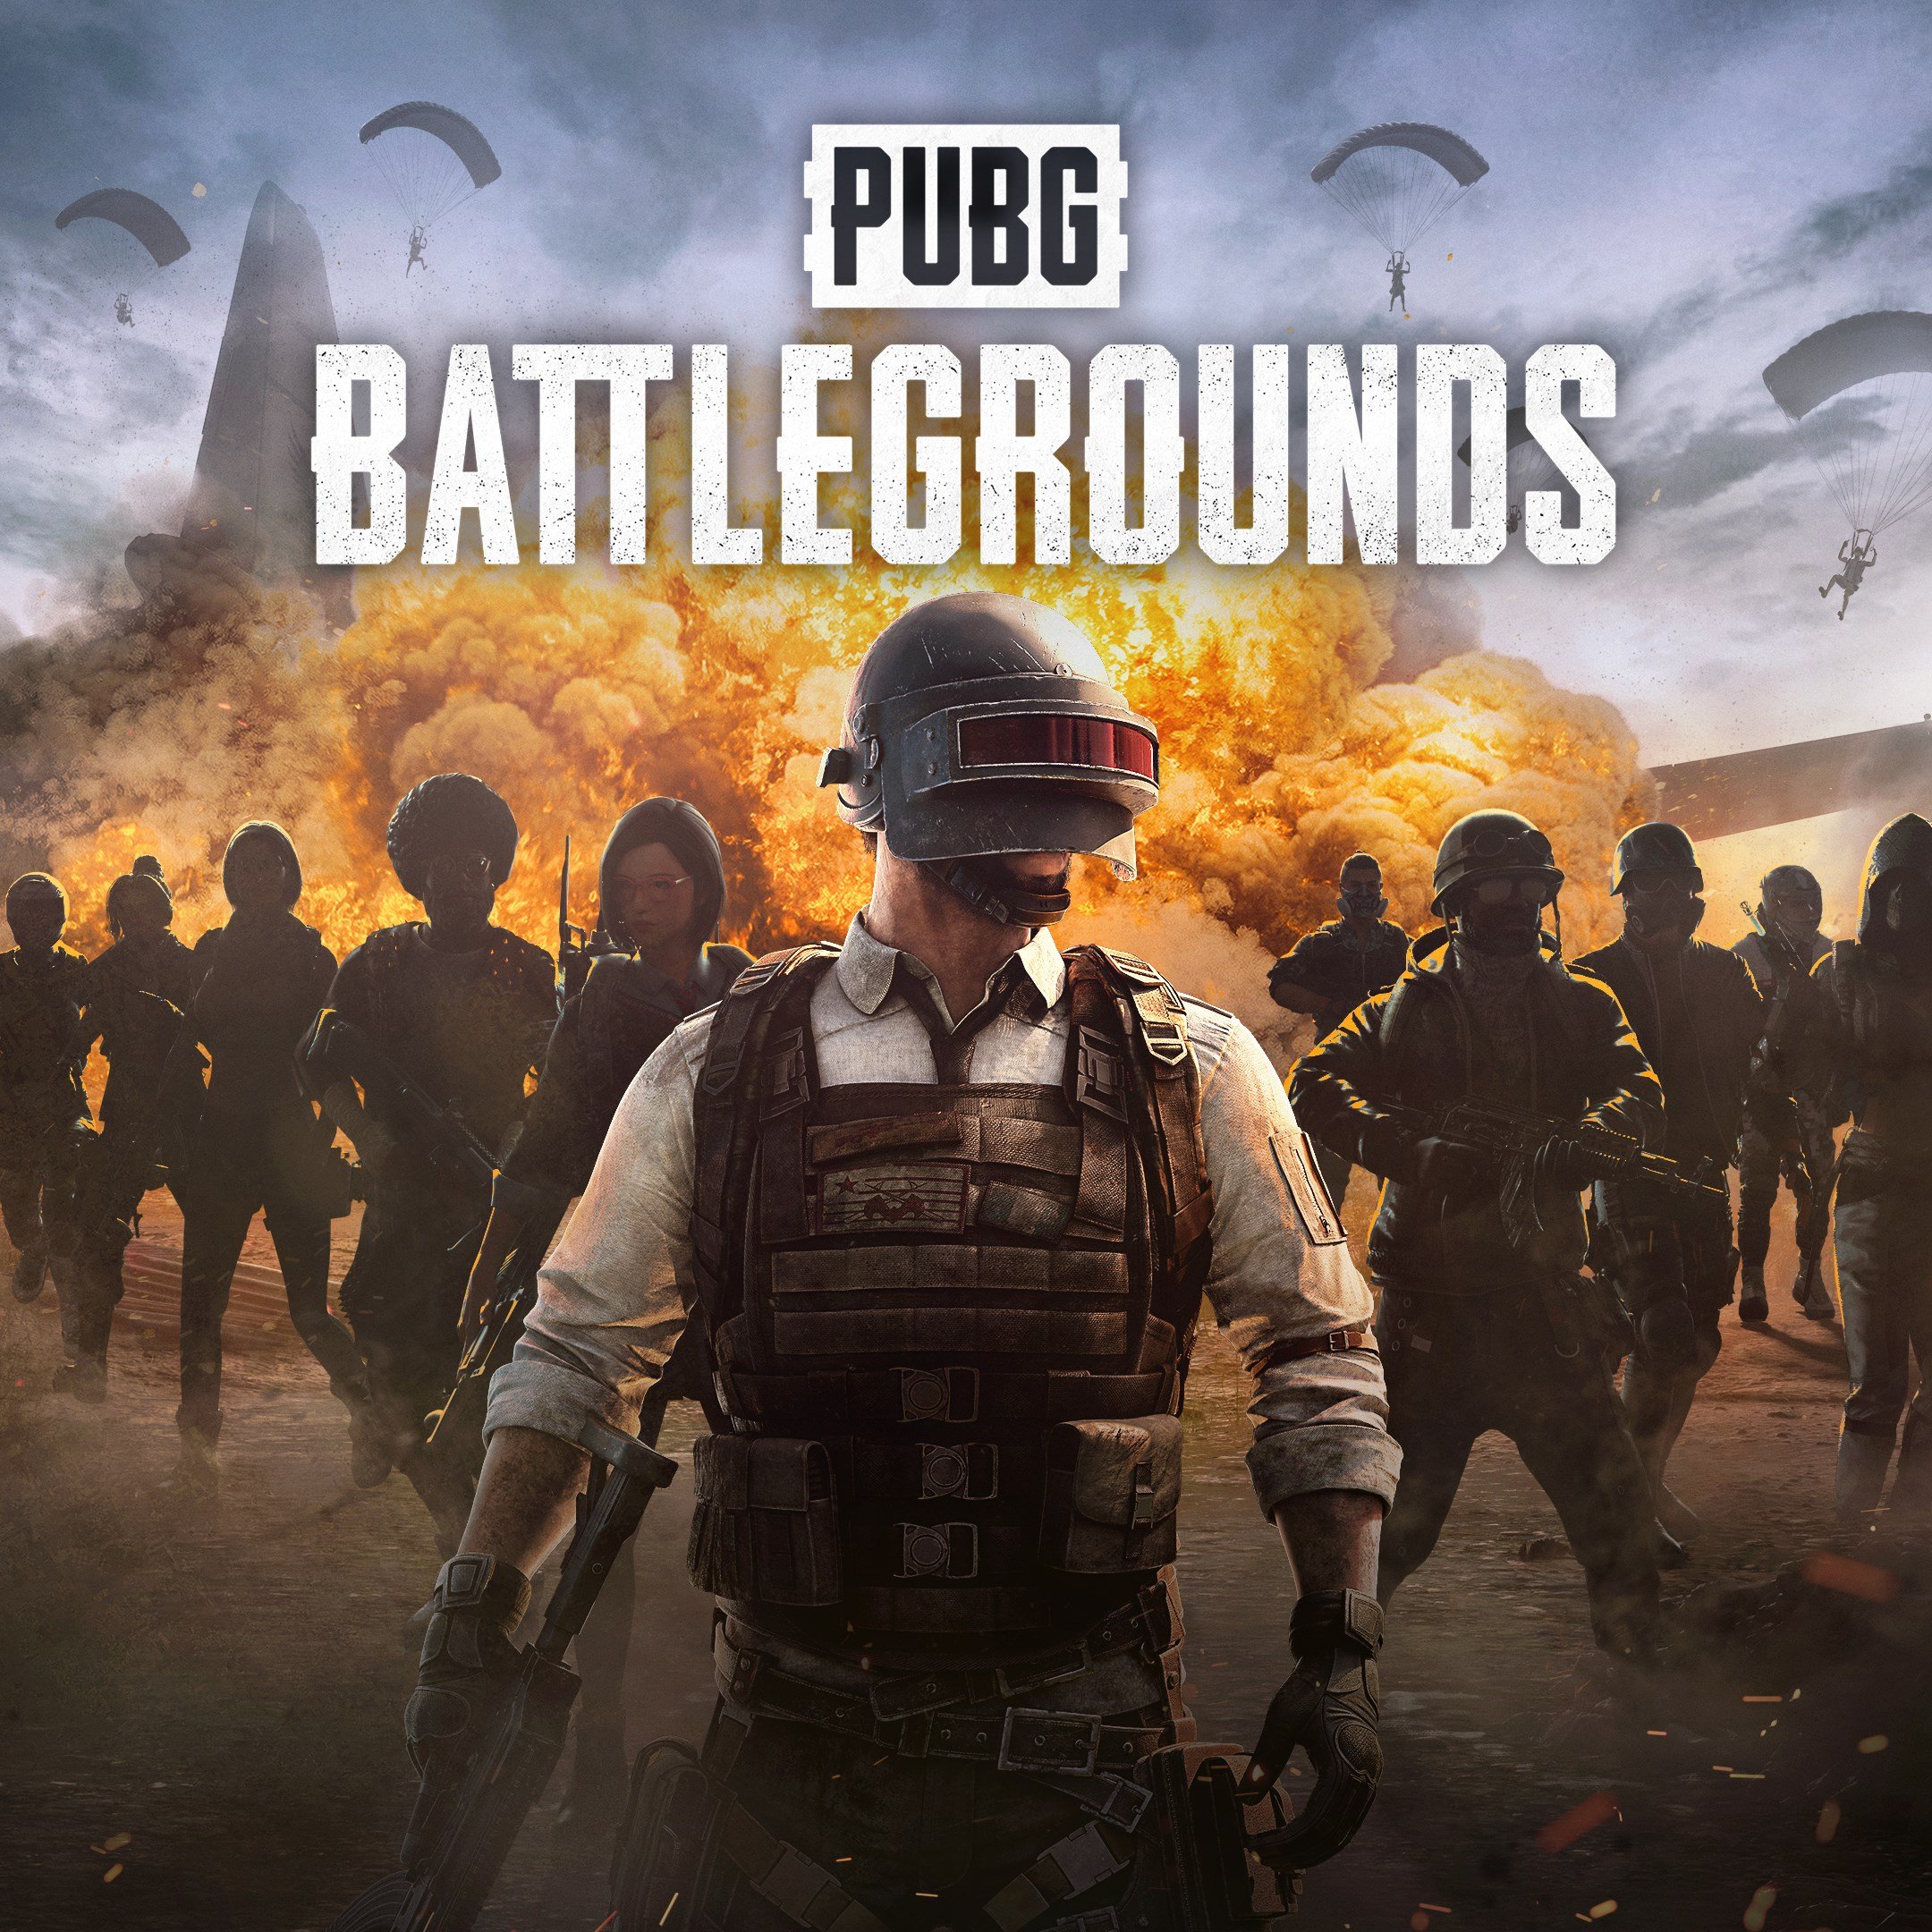 Boxart for PLAYERUNKNOWN'S BATTLEGROUNDS Full Product Release